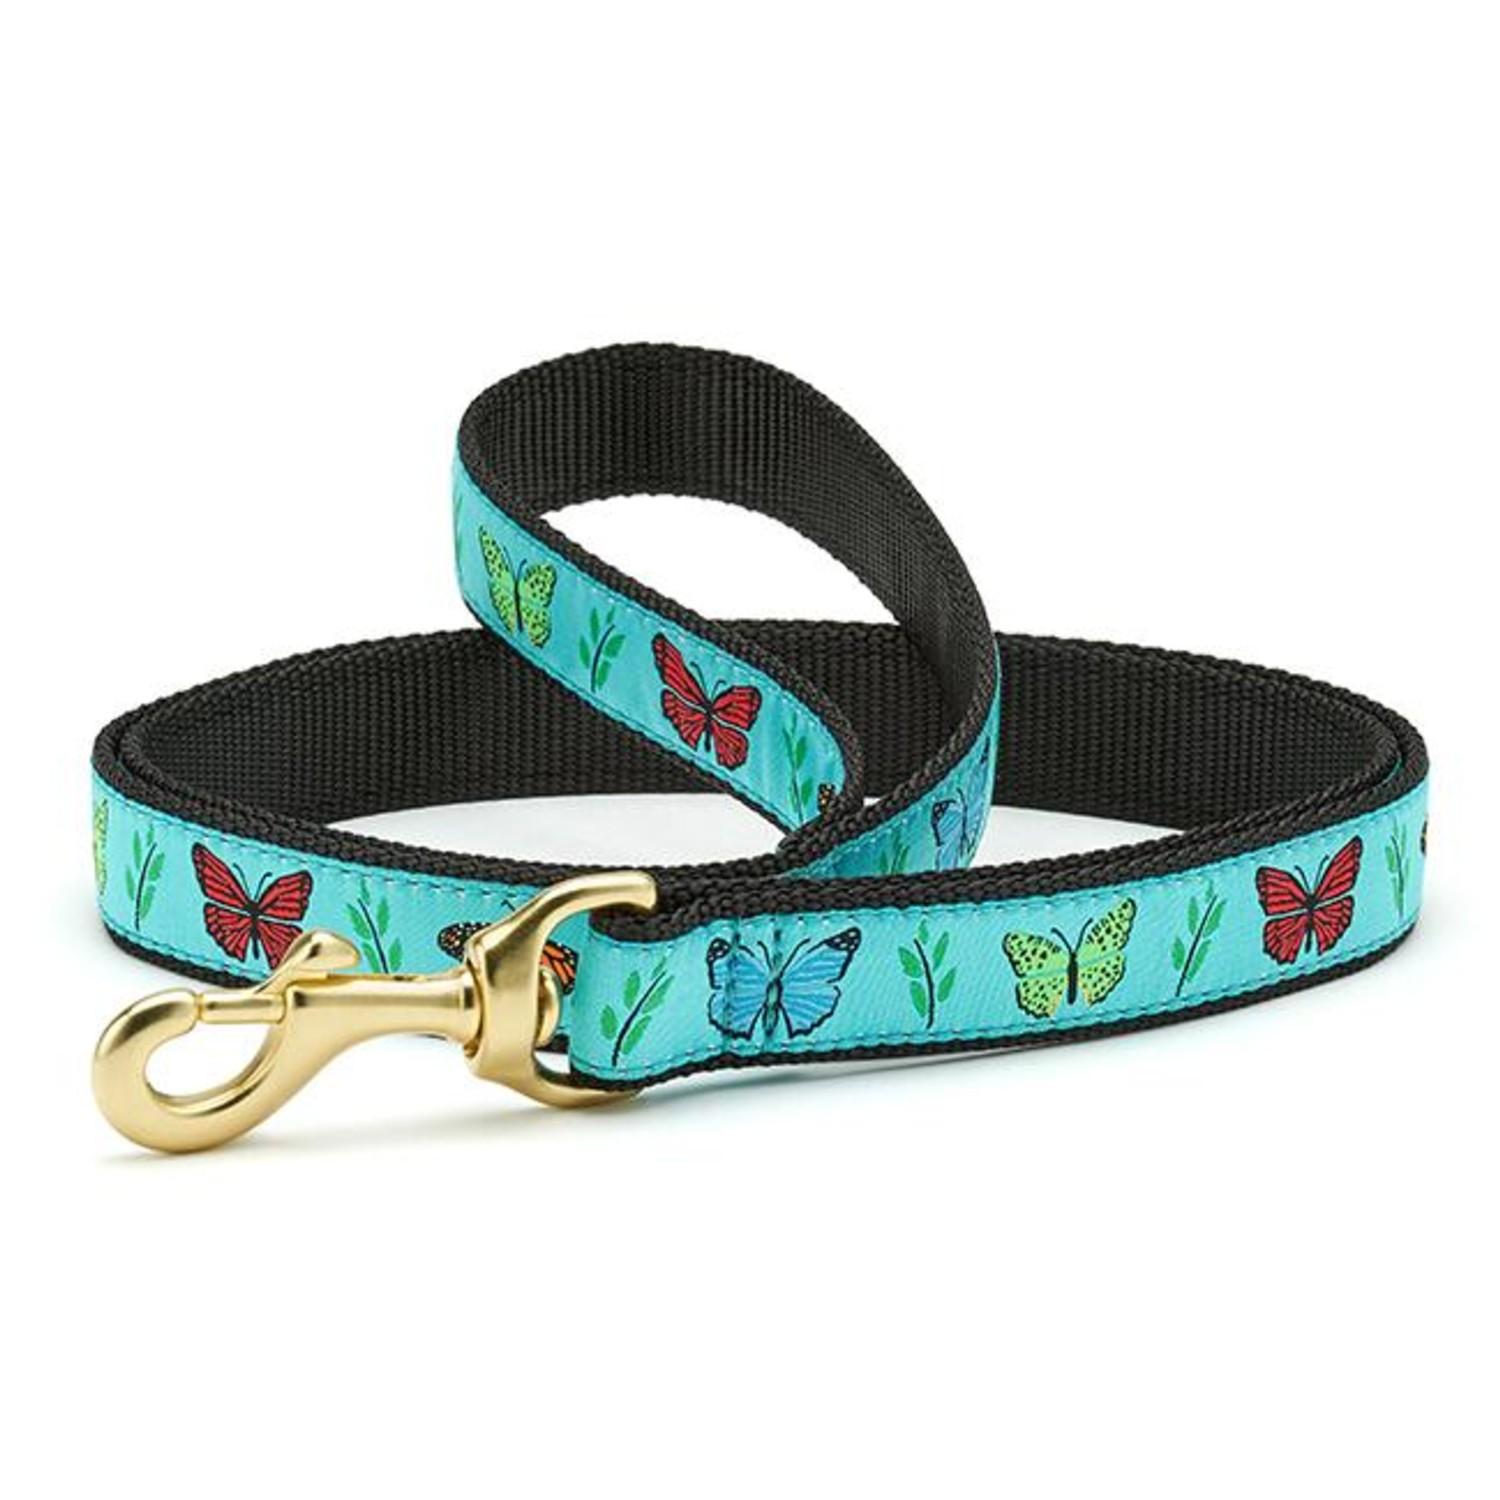 Butterfly Effect Dog Leash by Up Country